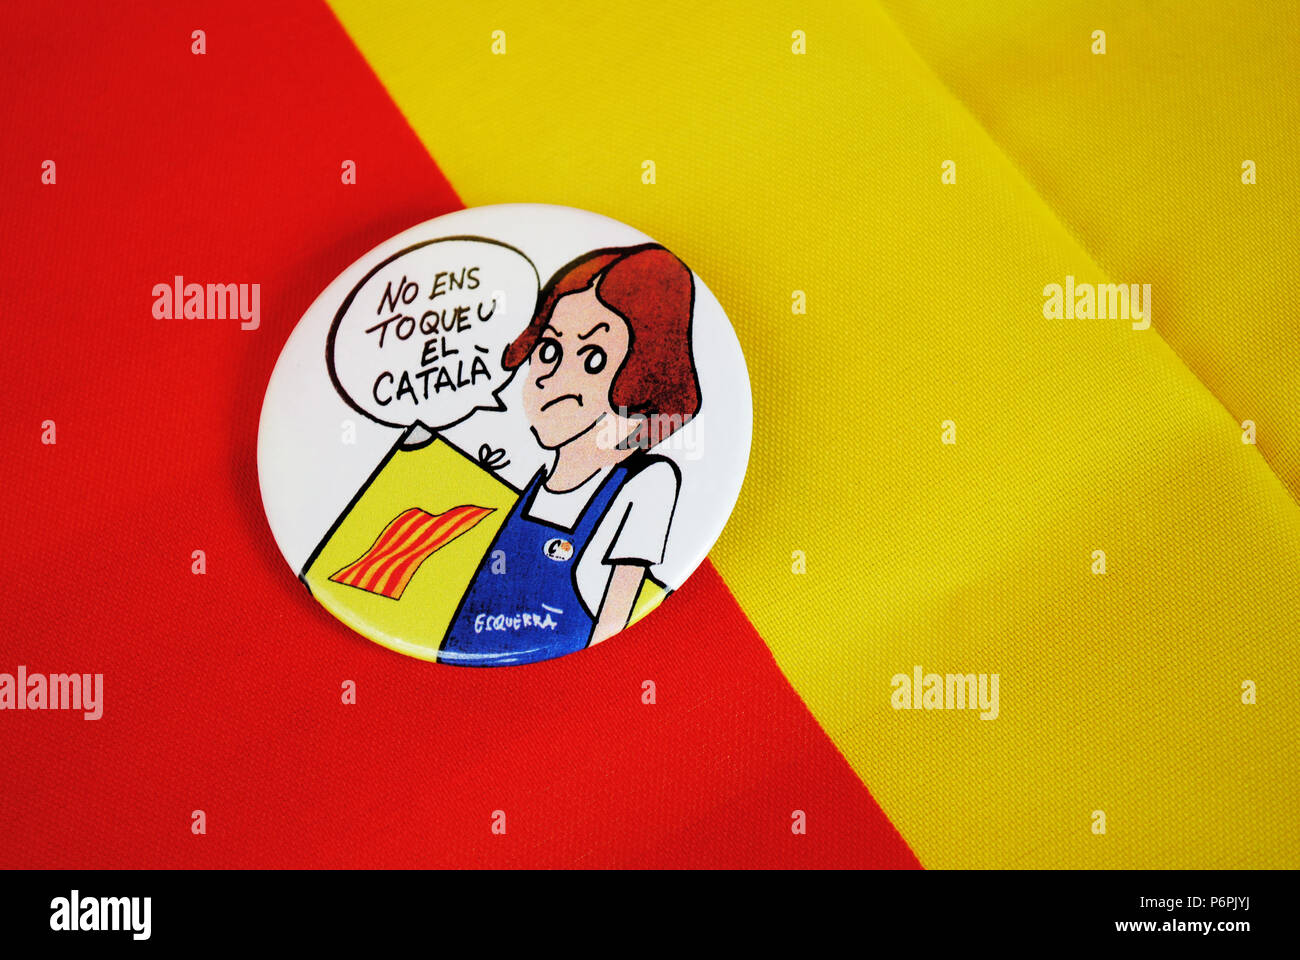 A circular badge on red and yellow background depicting a cartoon female student who disagrees with Spain's planned language system in education. Stock Photo